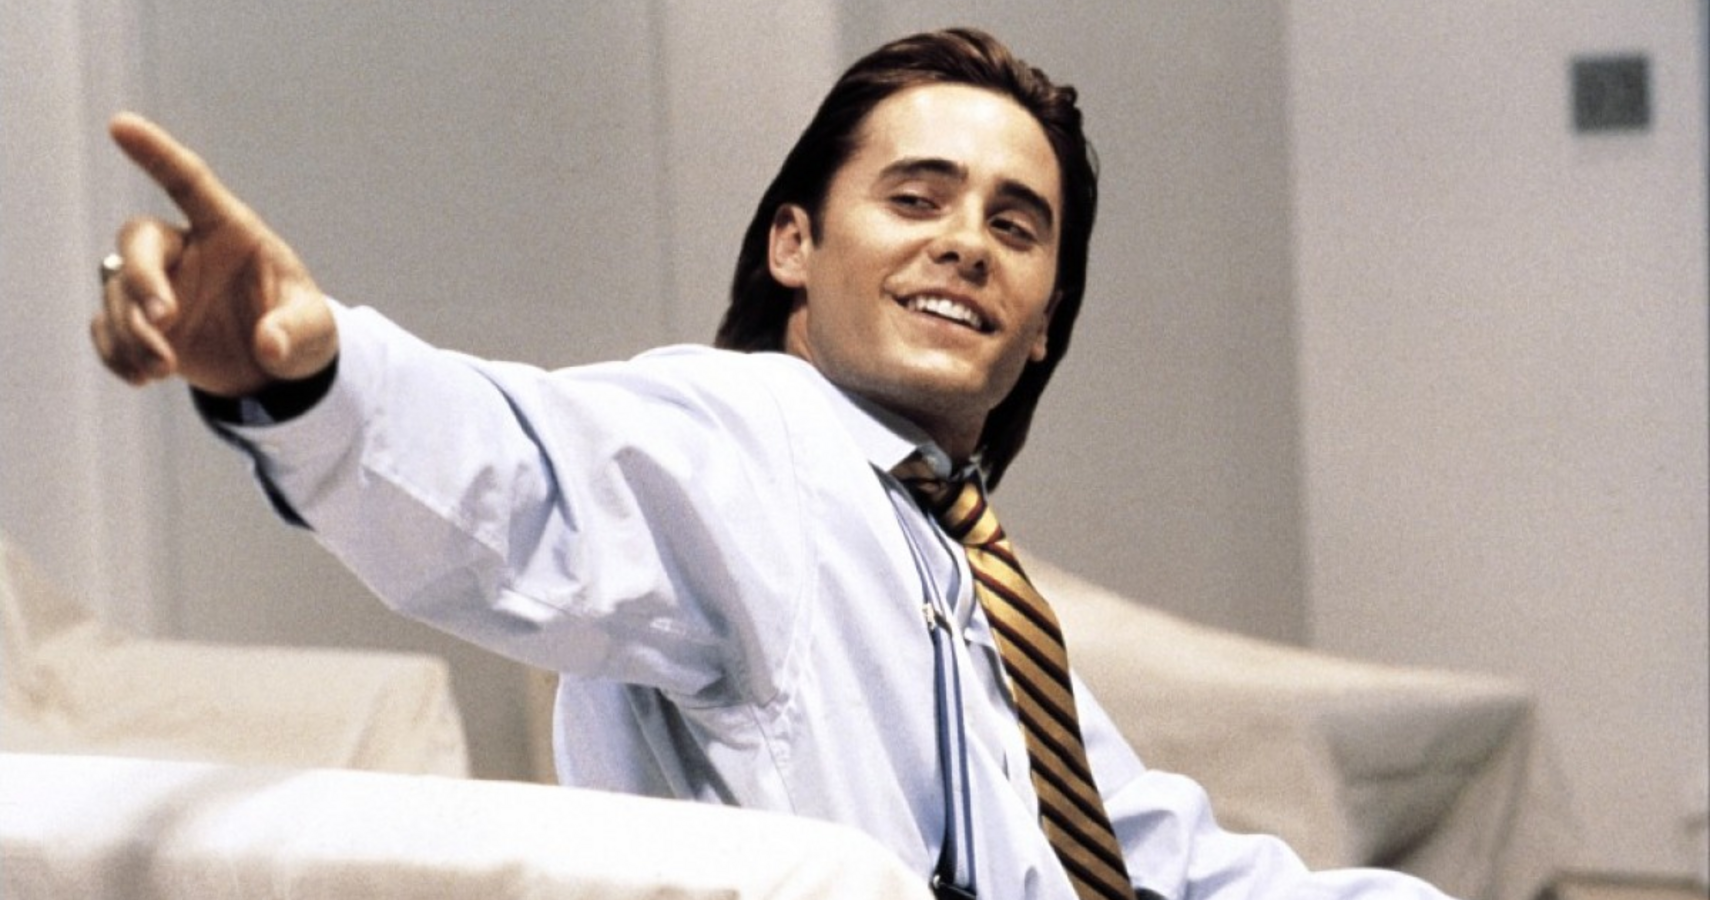 Jared Leto’s 10 Best Movies, According To Rotten Tomatoes